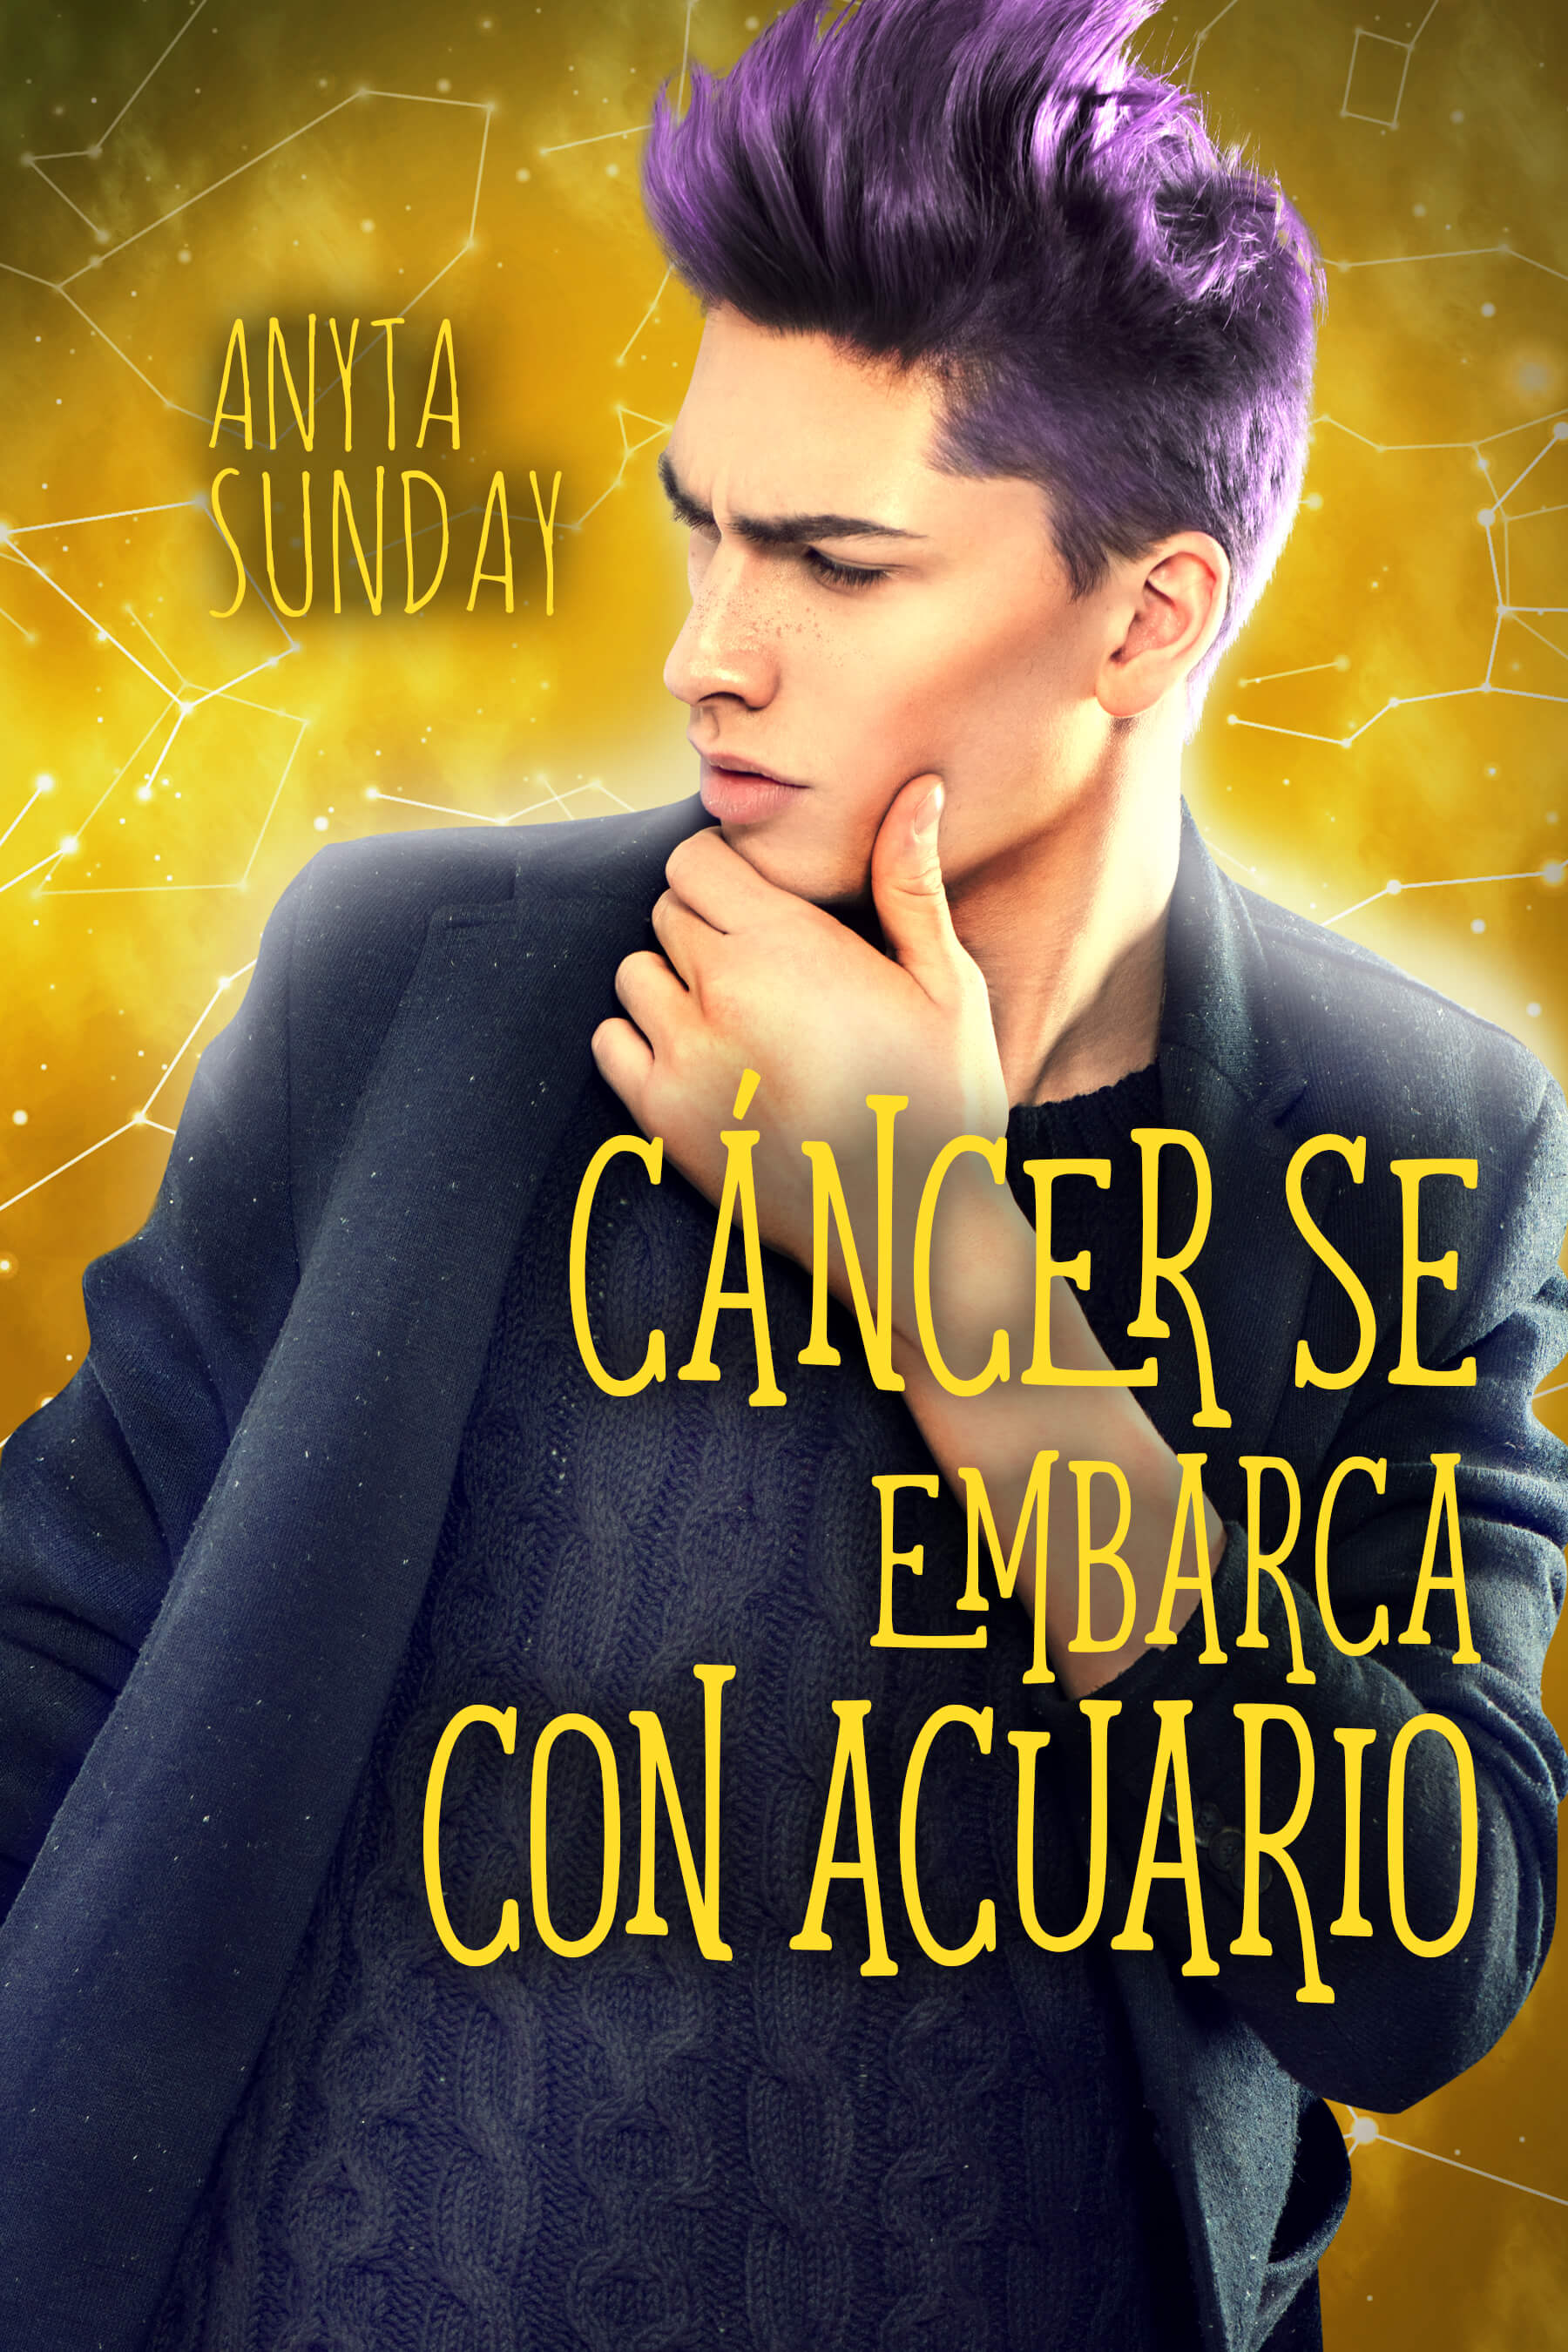 Spanish translation of "Cancer Ships Aquarius", a quirky gay romance by Anyta Sunday